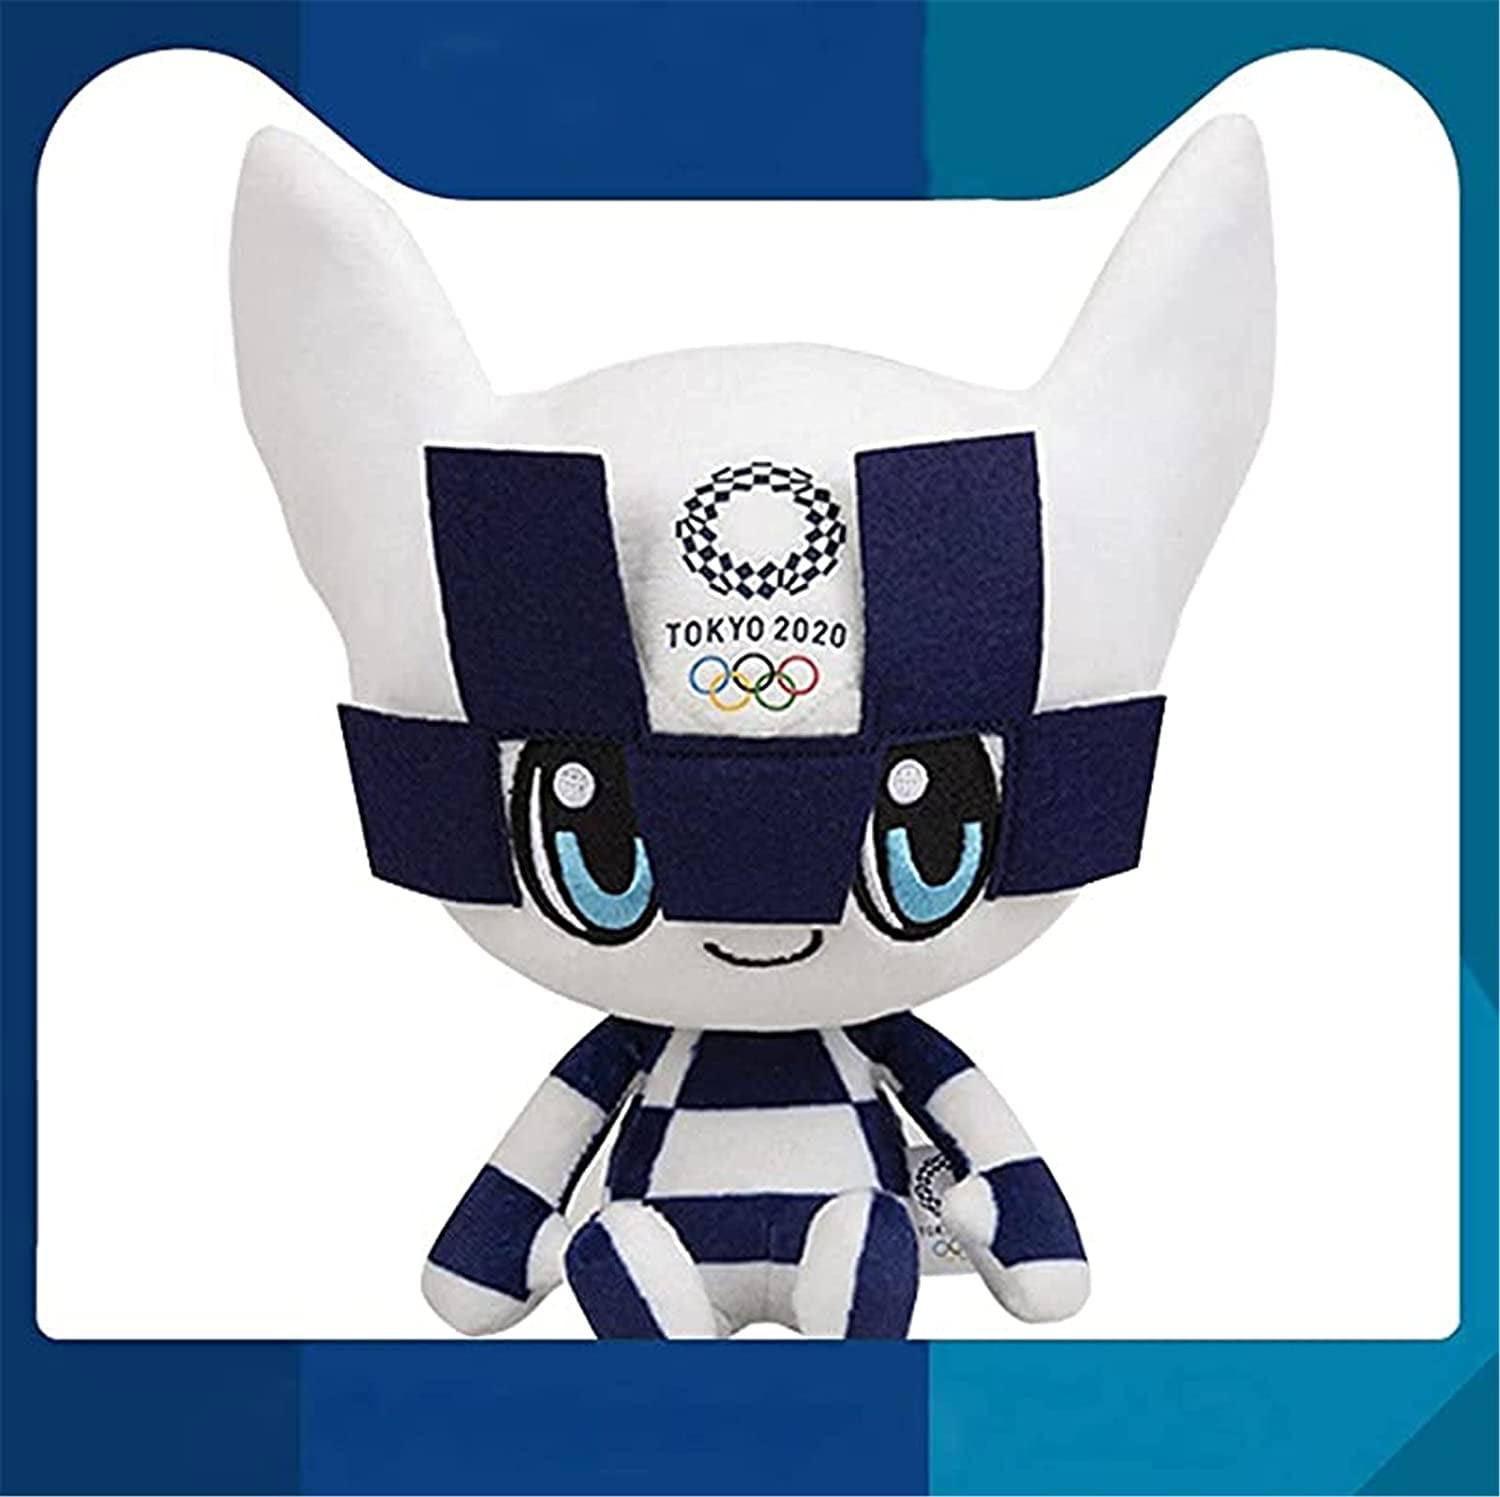 Details about   Tokyo Olympics 2020 Olympic Plush Pass Case With Reel Mascot MIRAITOWA JAPAN